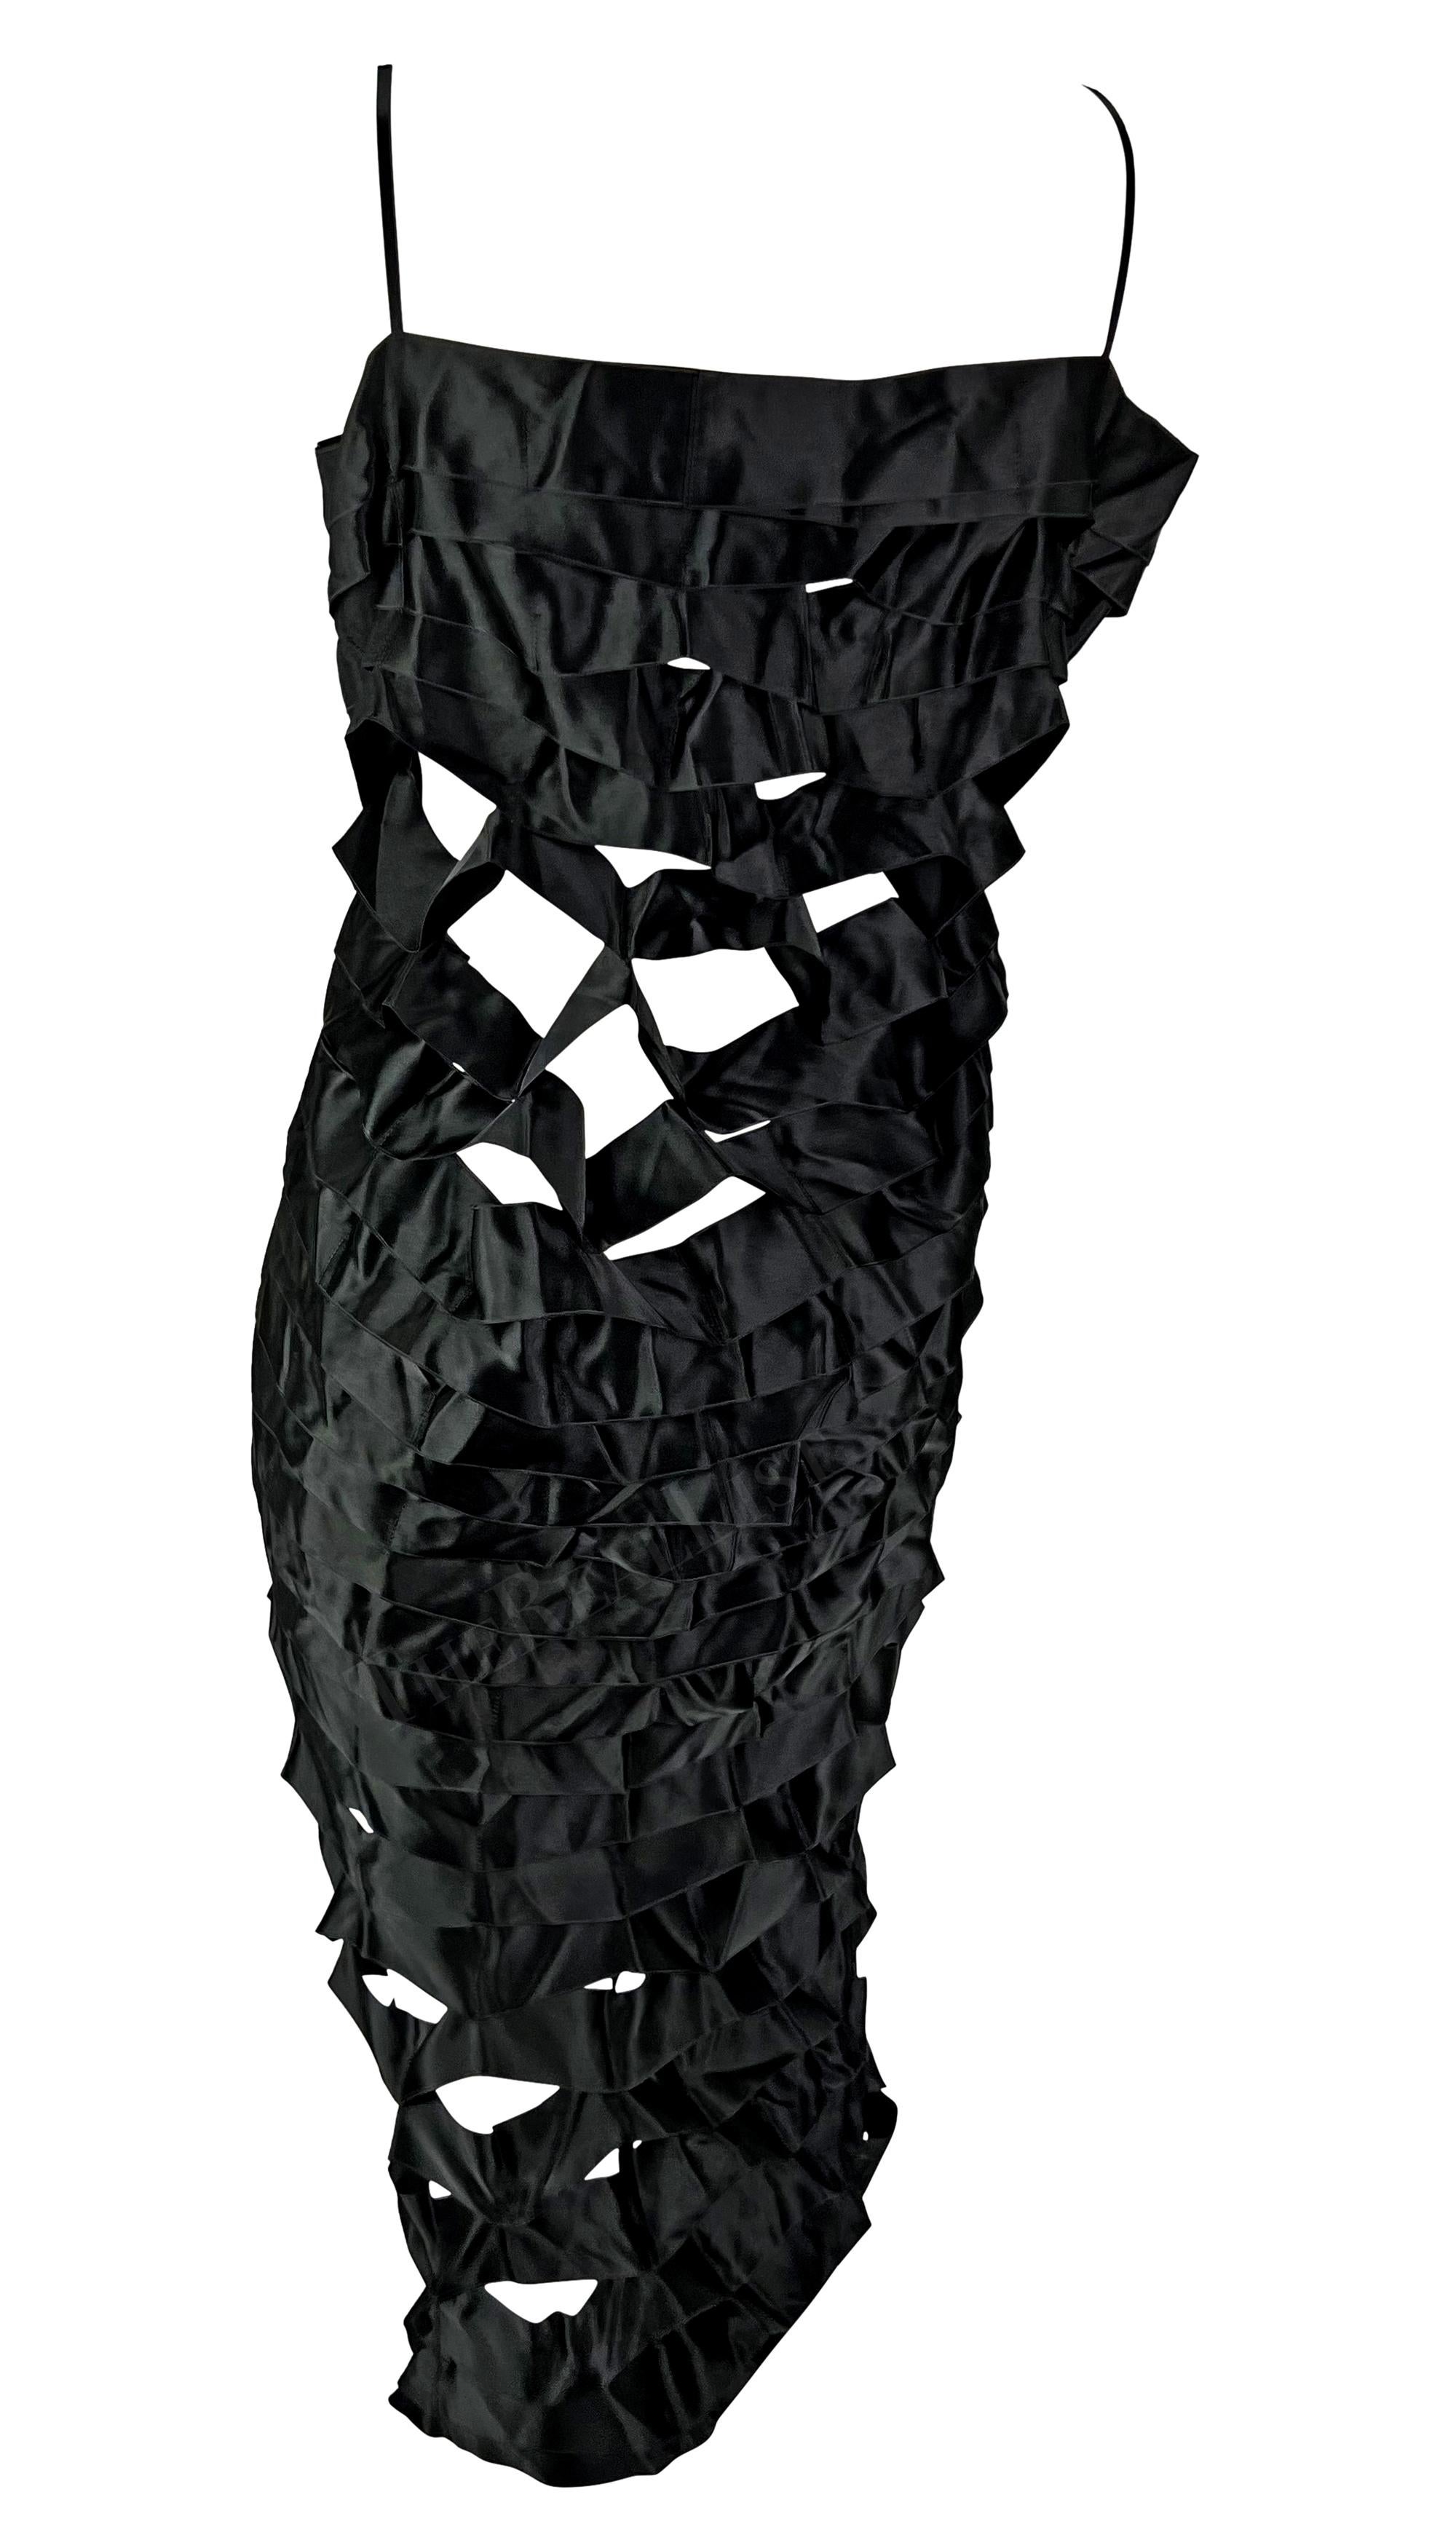 S/S 1998 Helmut Lang Black Silk Cut Out Ribbon Runway Gown  For Sale 5